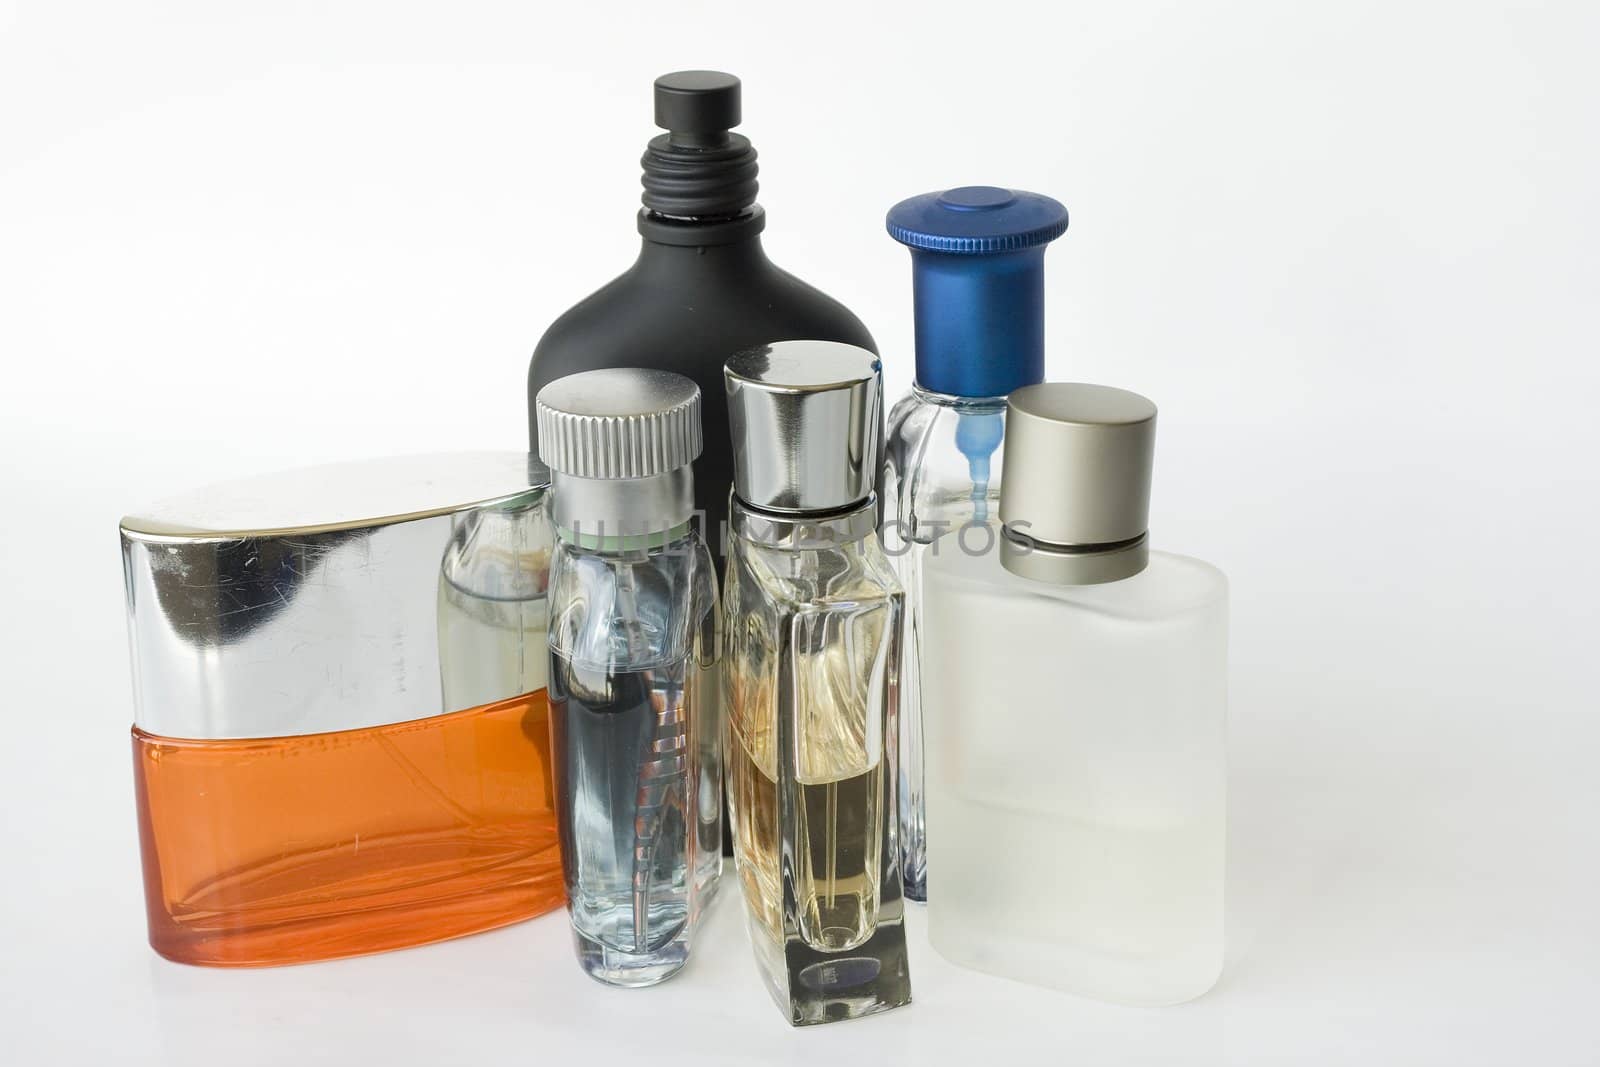 Perfumes and Fragrances Bottles by sacatani